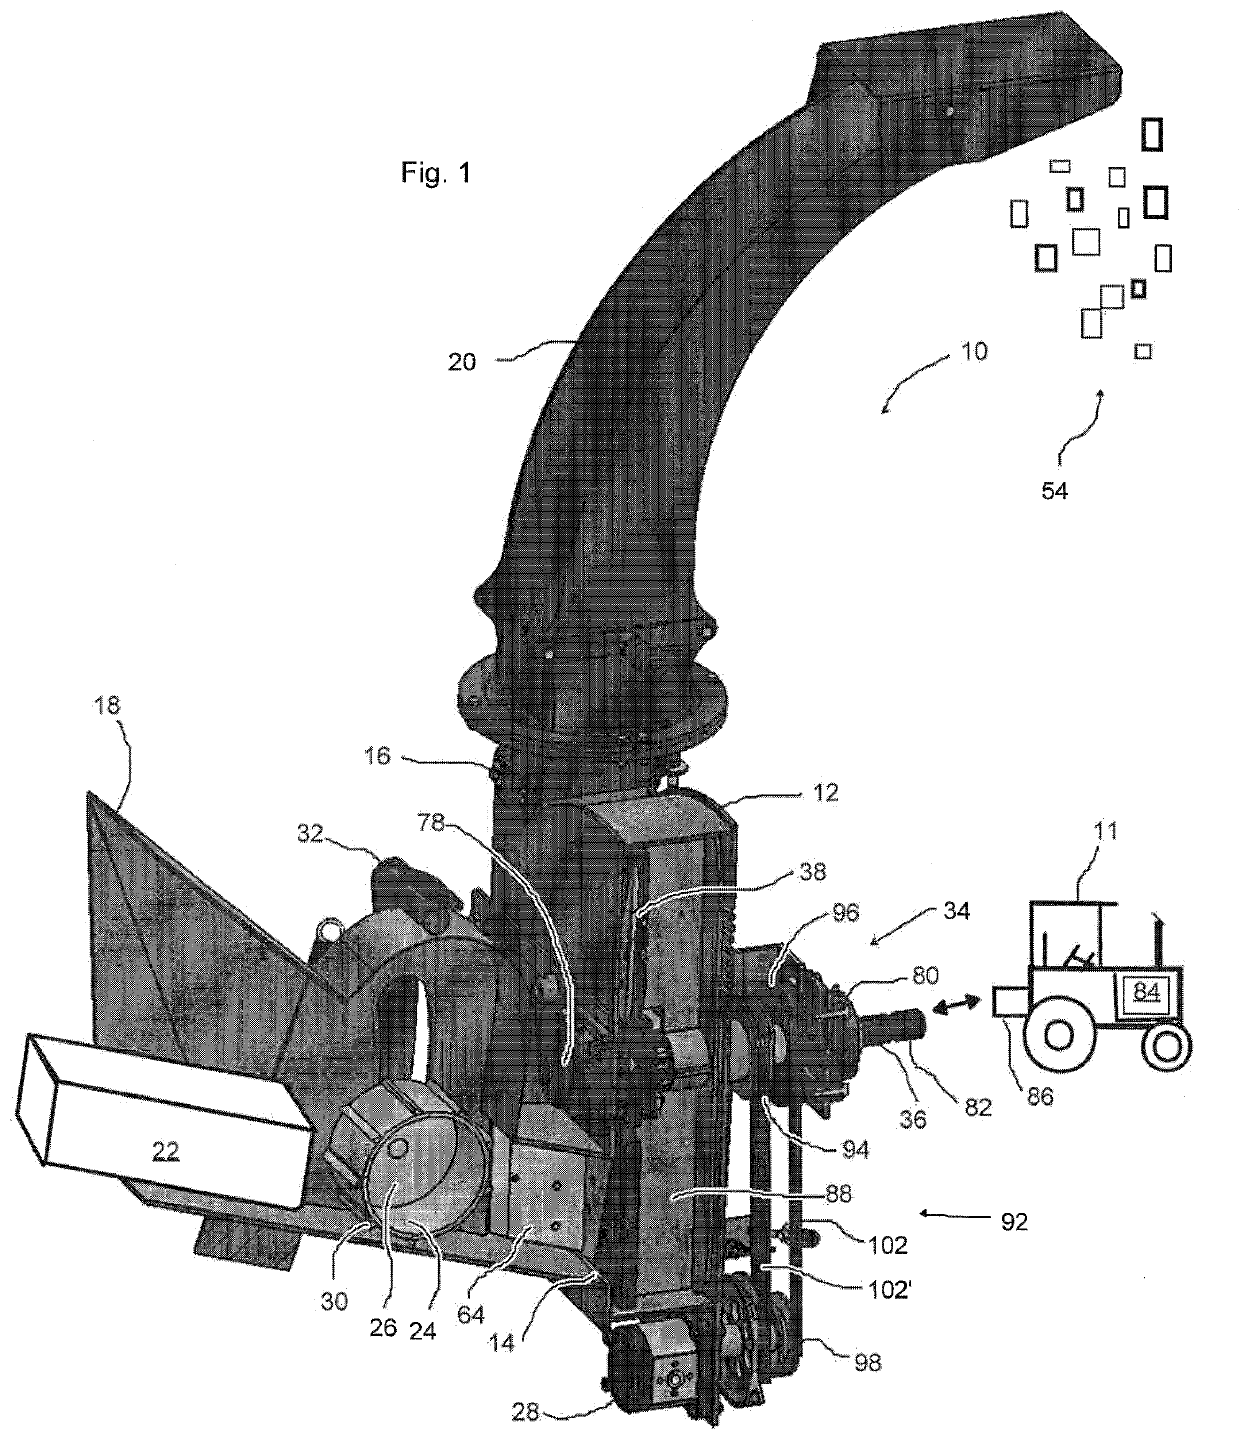 Flywheel and paddle assembly for a chipping or shredding apparatus, and an apparatus incorporating same